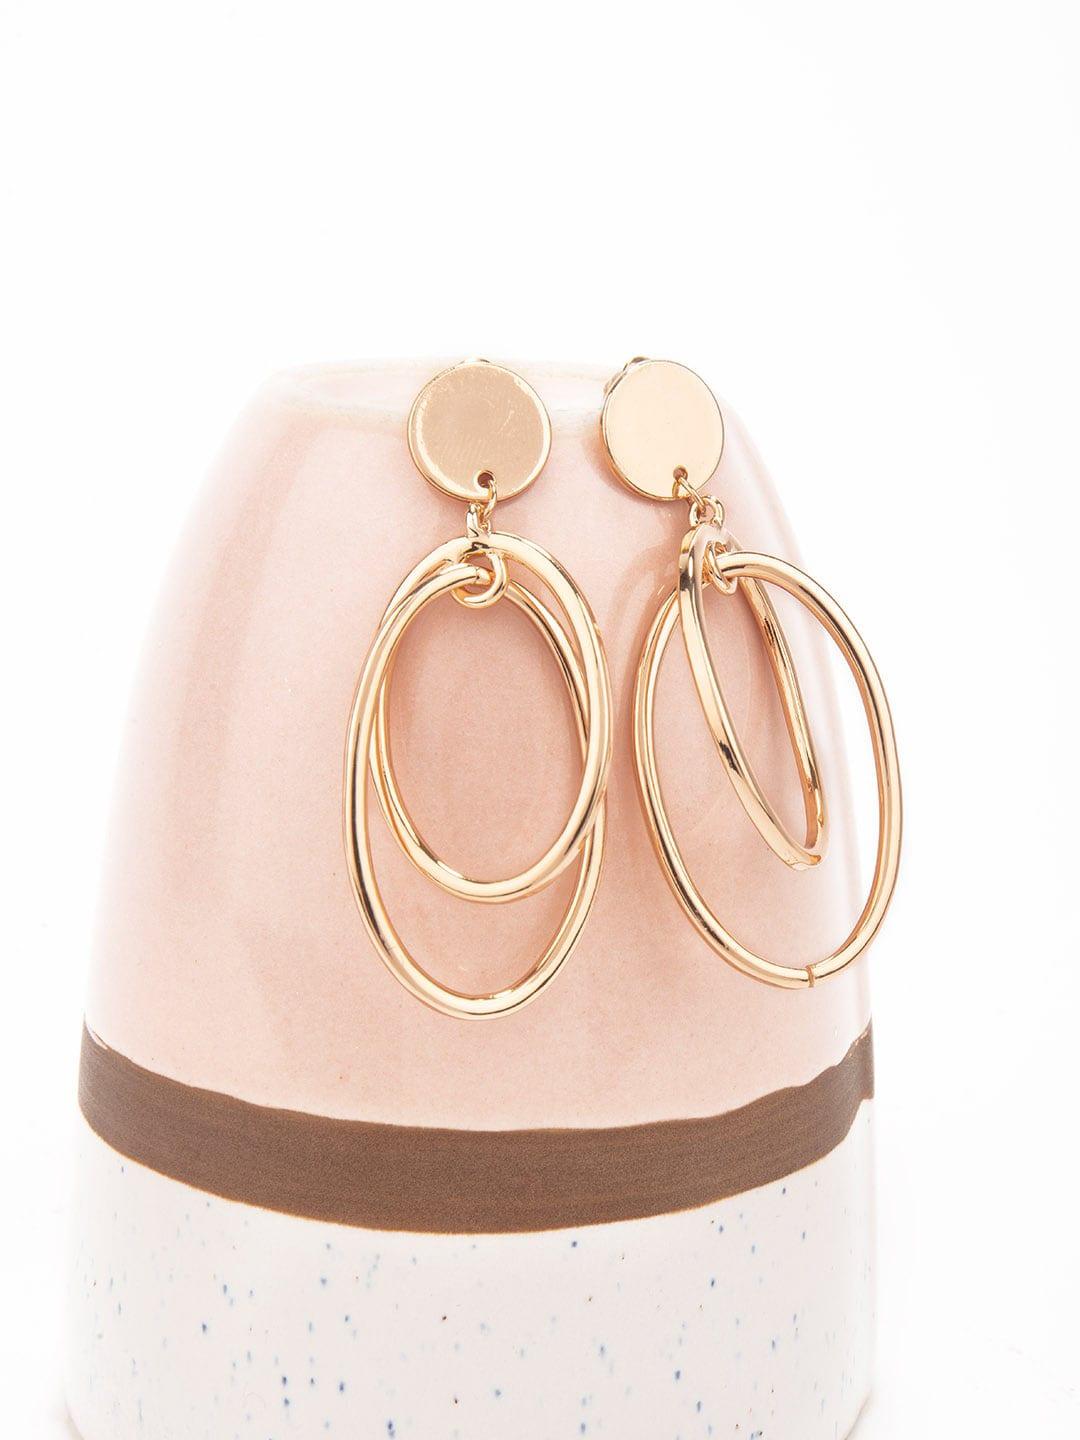 Lilly & sparkle Gold-Toned Oval Drop Earrings